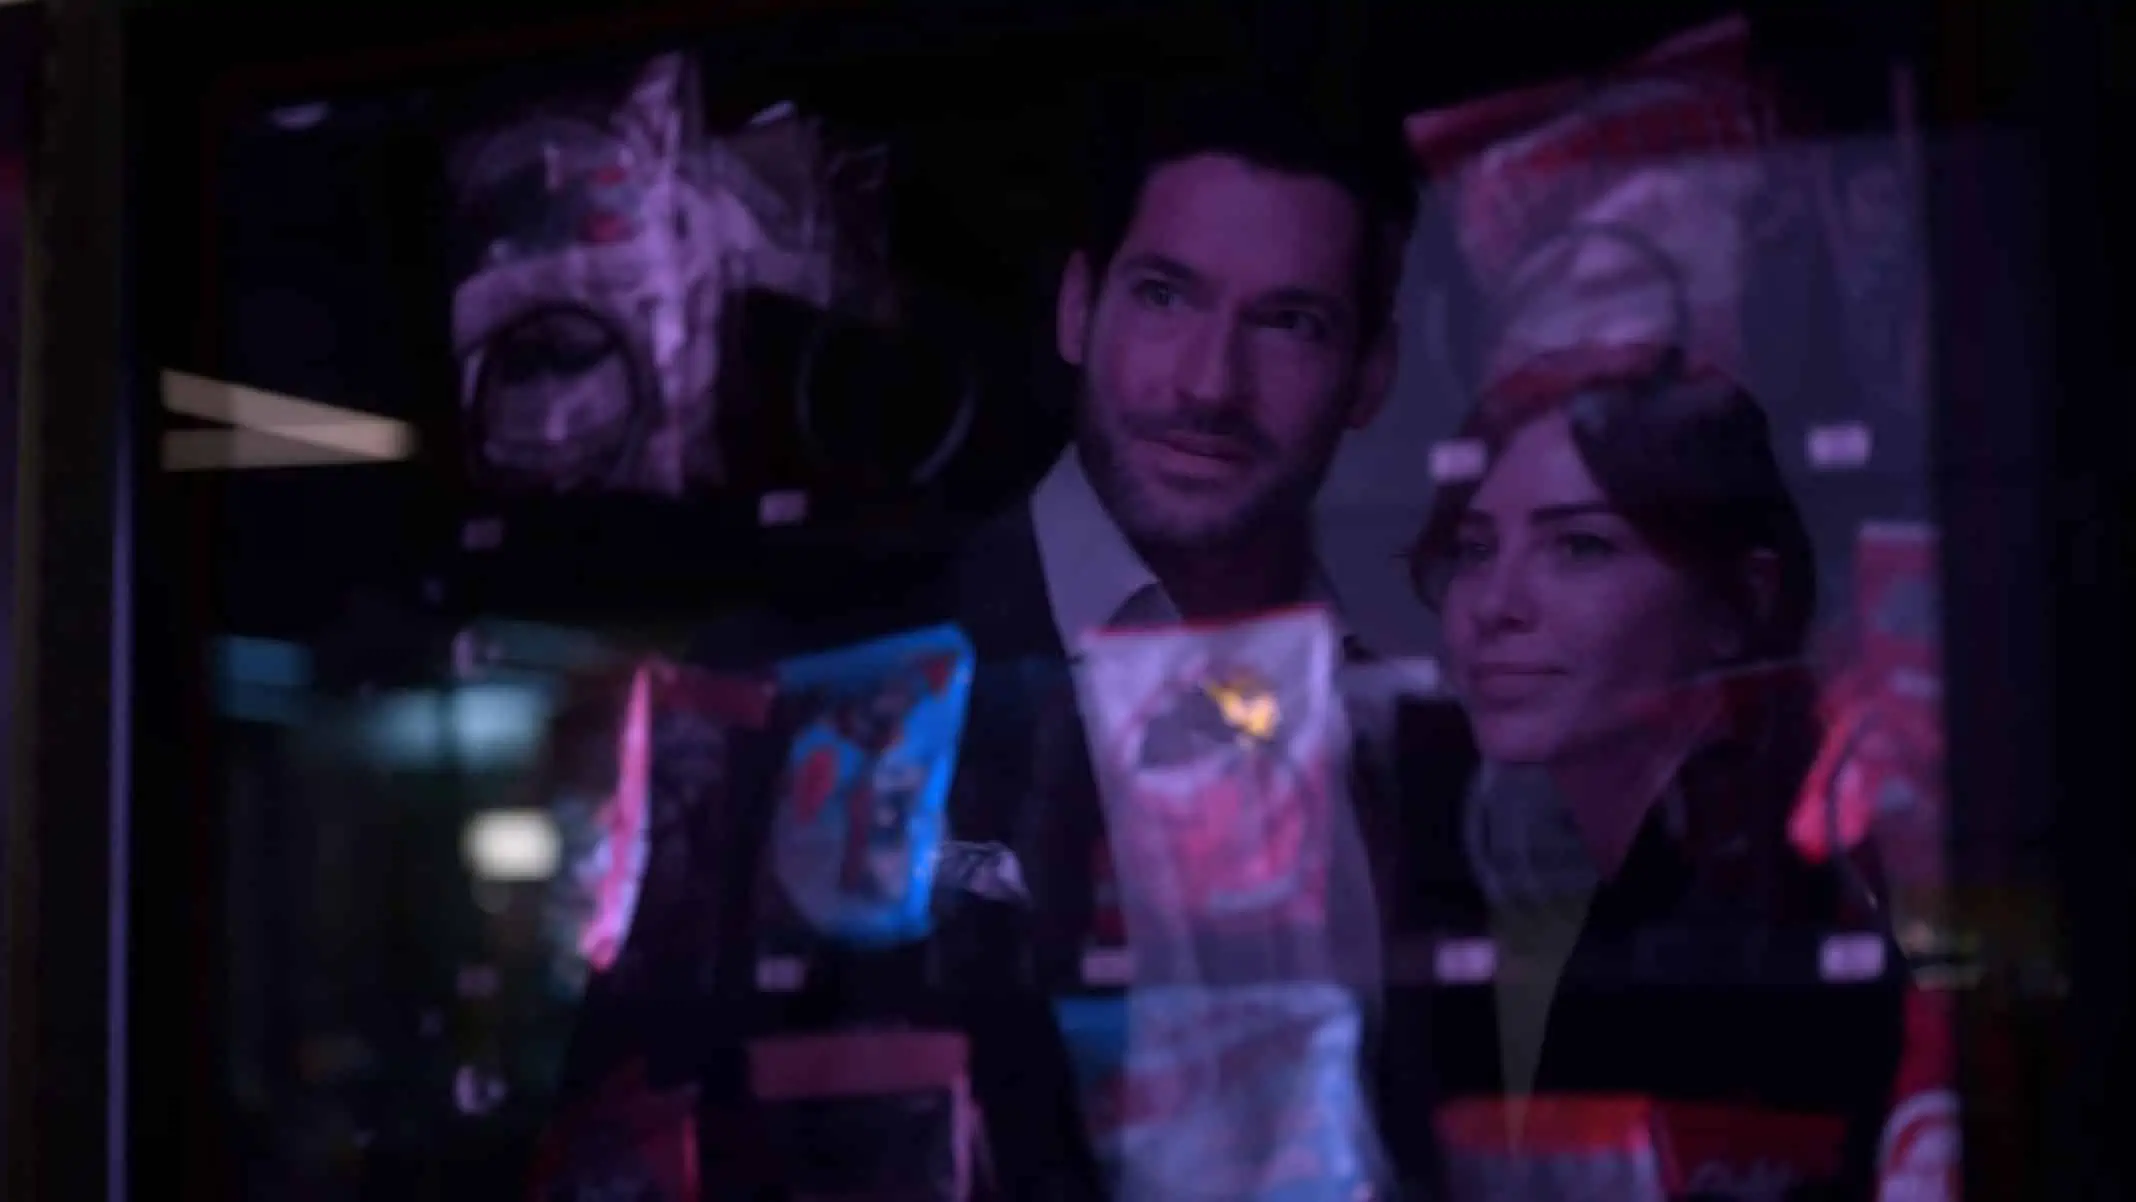 Michael and Chloe Lucifer Season 5 Episodes 1 to 3 scaled